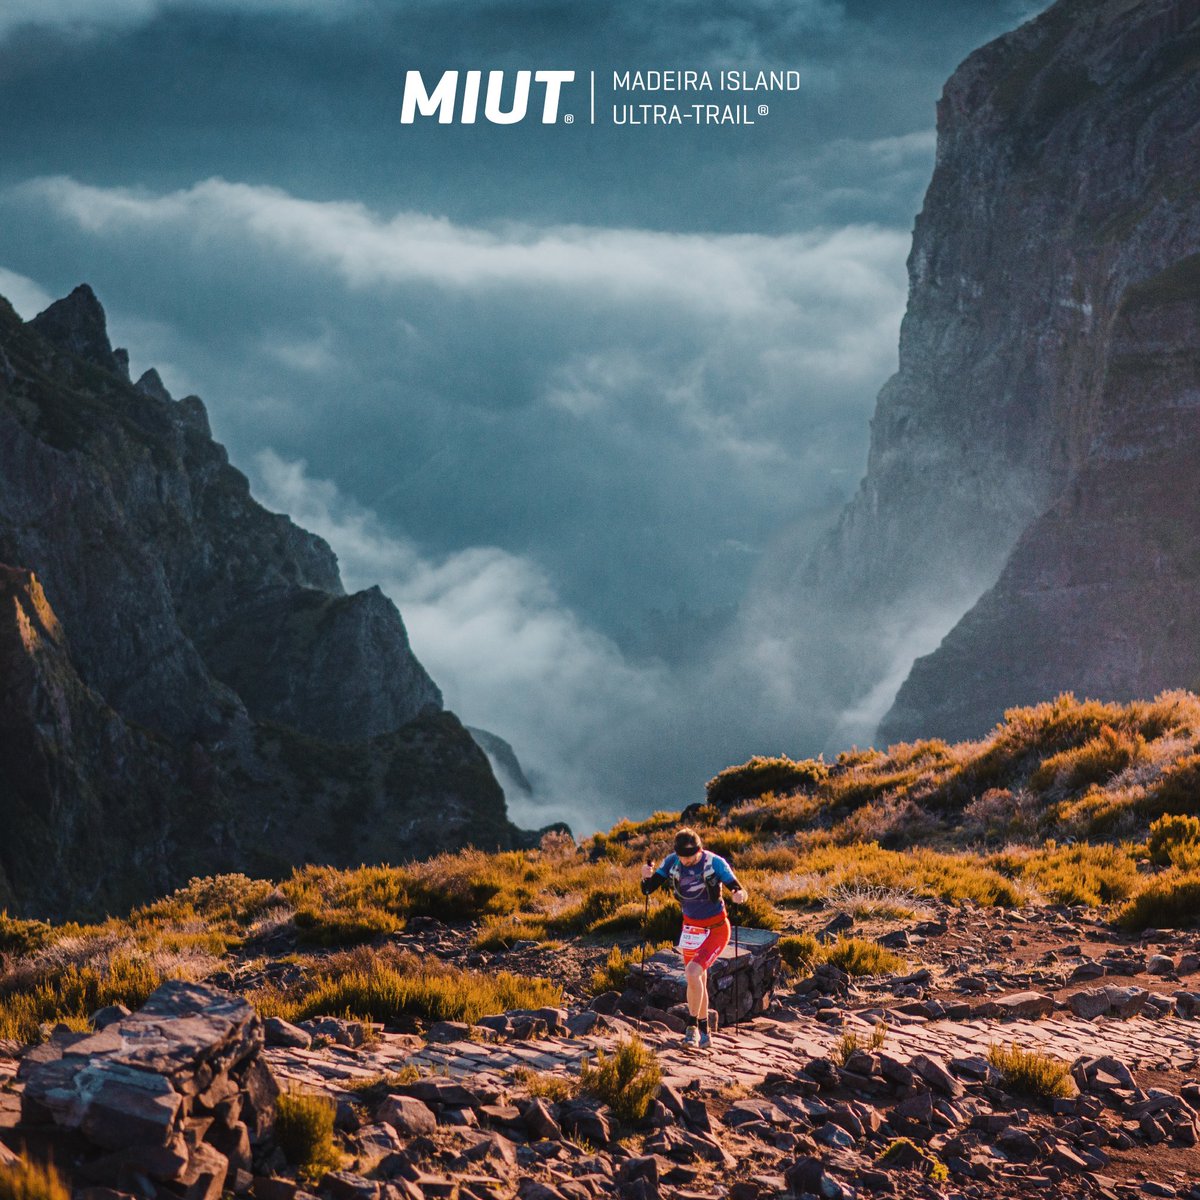 Have a great weekend out there 🏃‍♀🏃‍♂⛰

📸 Paulo Abreu 

 #miut23 #miut #visitmadeira #madeiraoceantrails